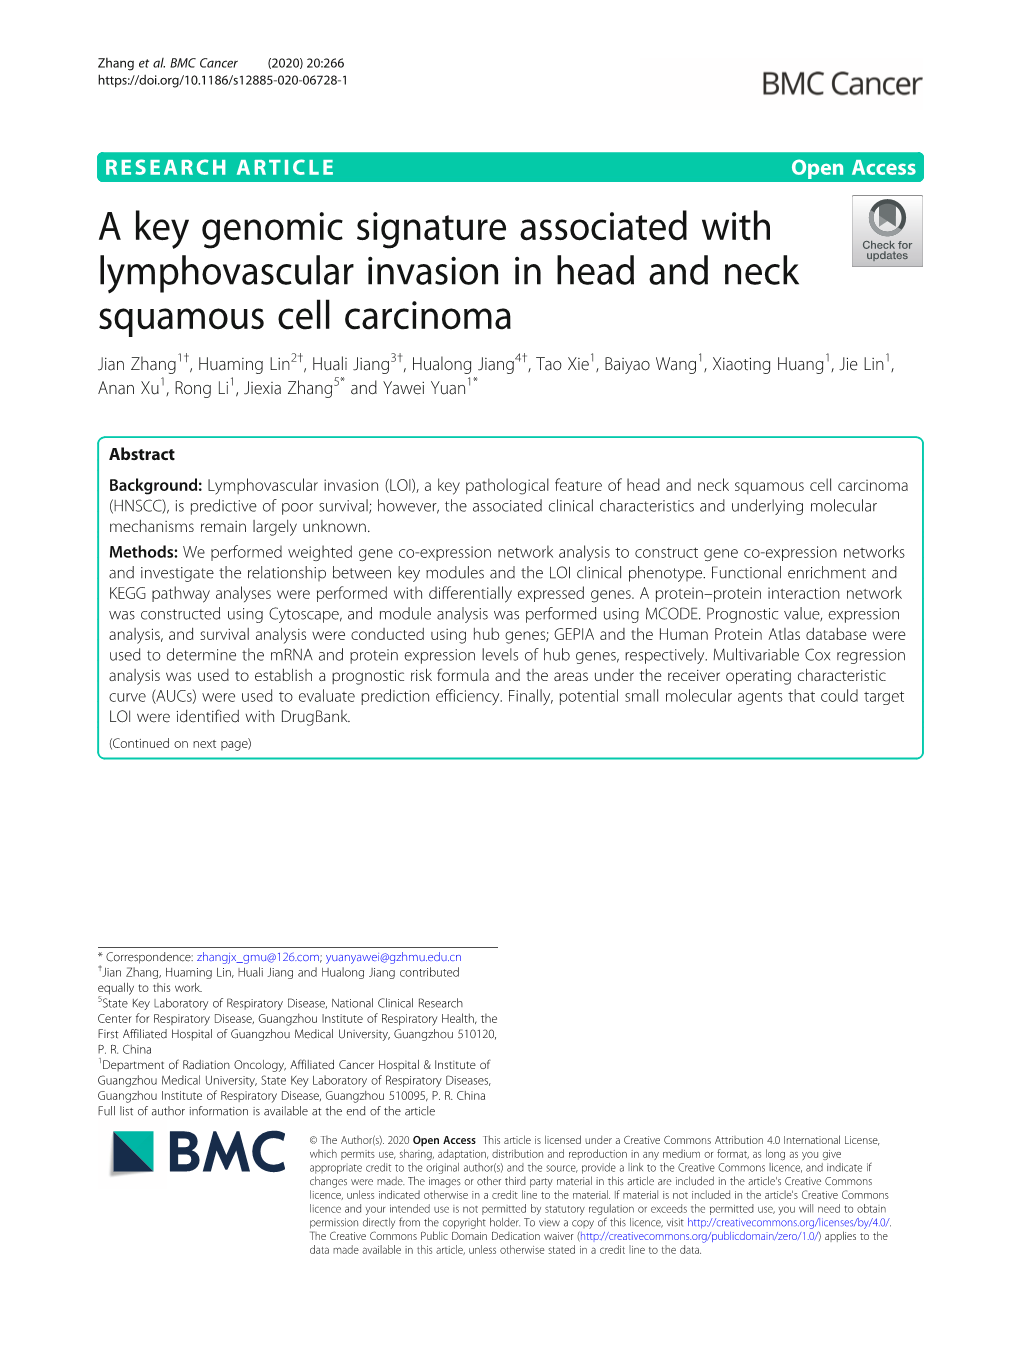 A Key Genomic Signature Associated with Lymphovascular